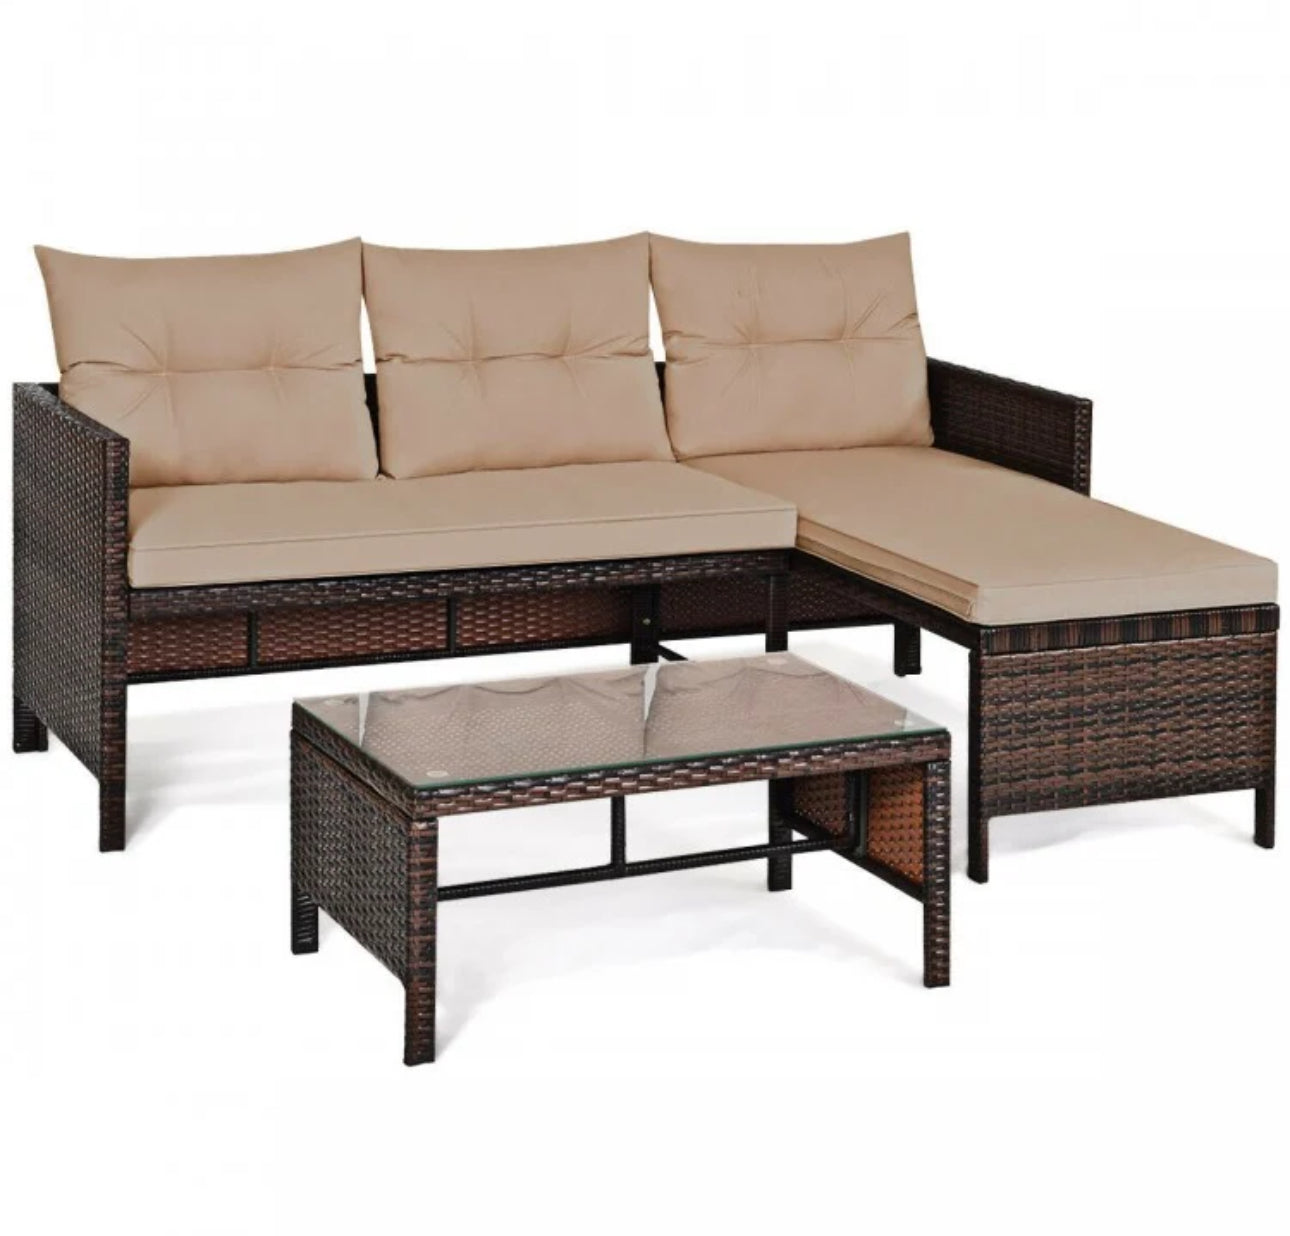 Super Duty Comfortable 3 Piece Outdoor Patio Corner Rattan Sofa Couch Set | Easy To Clean | Water Resistant